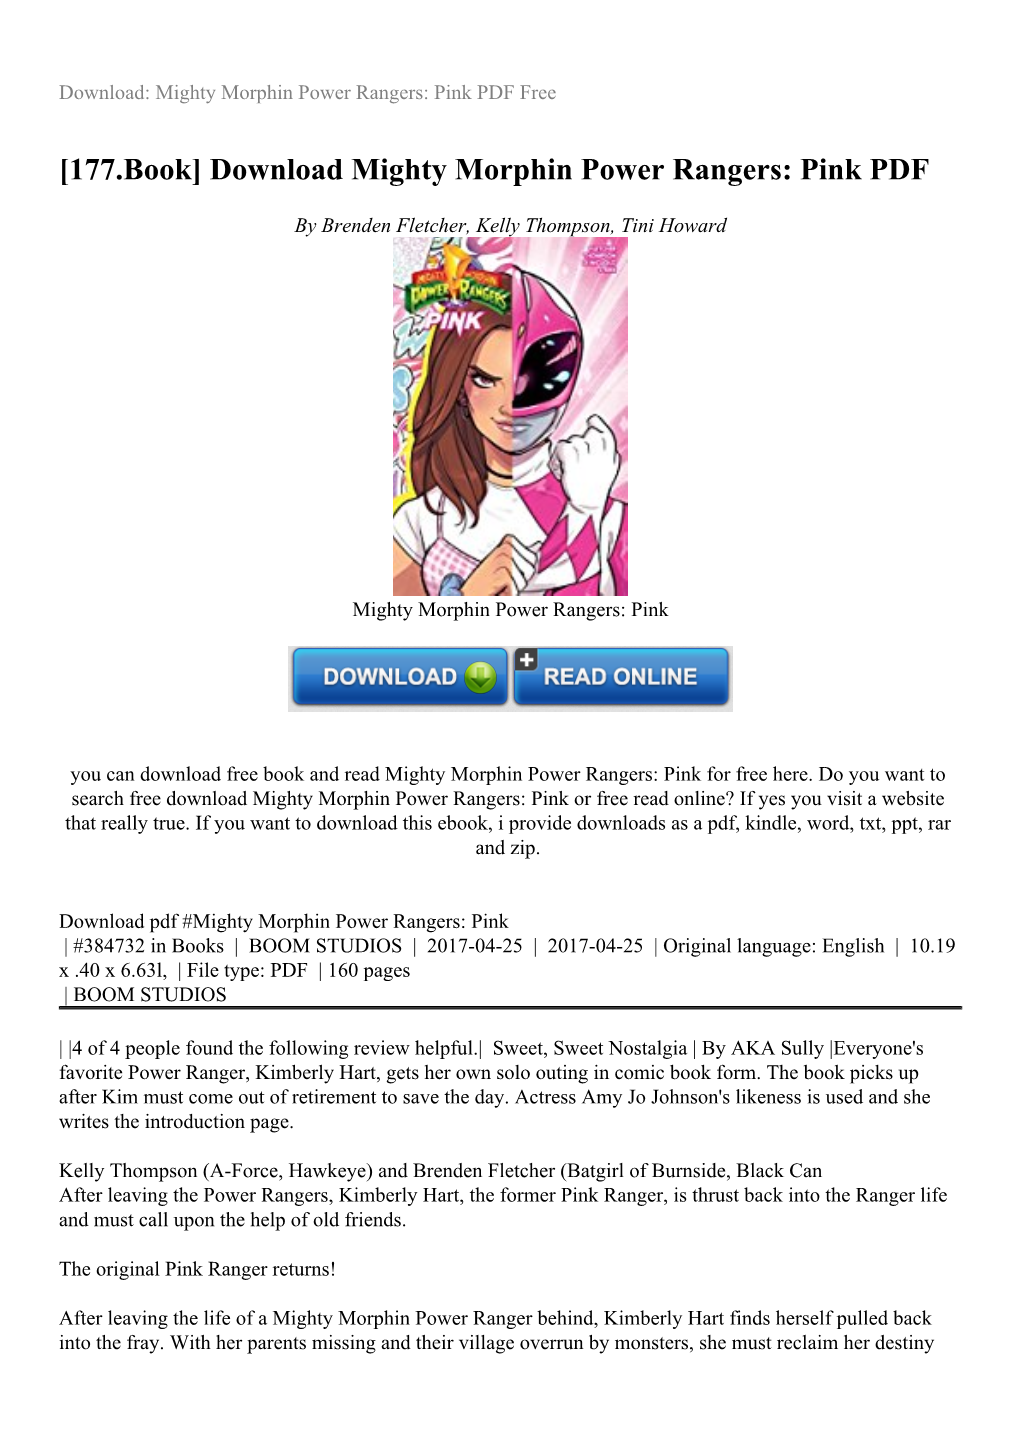 Download Mighty Morphin Power Rangers: Pink PDF